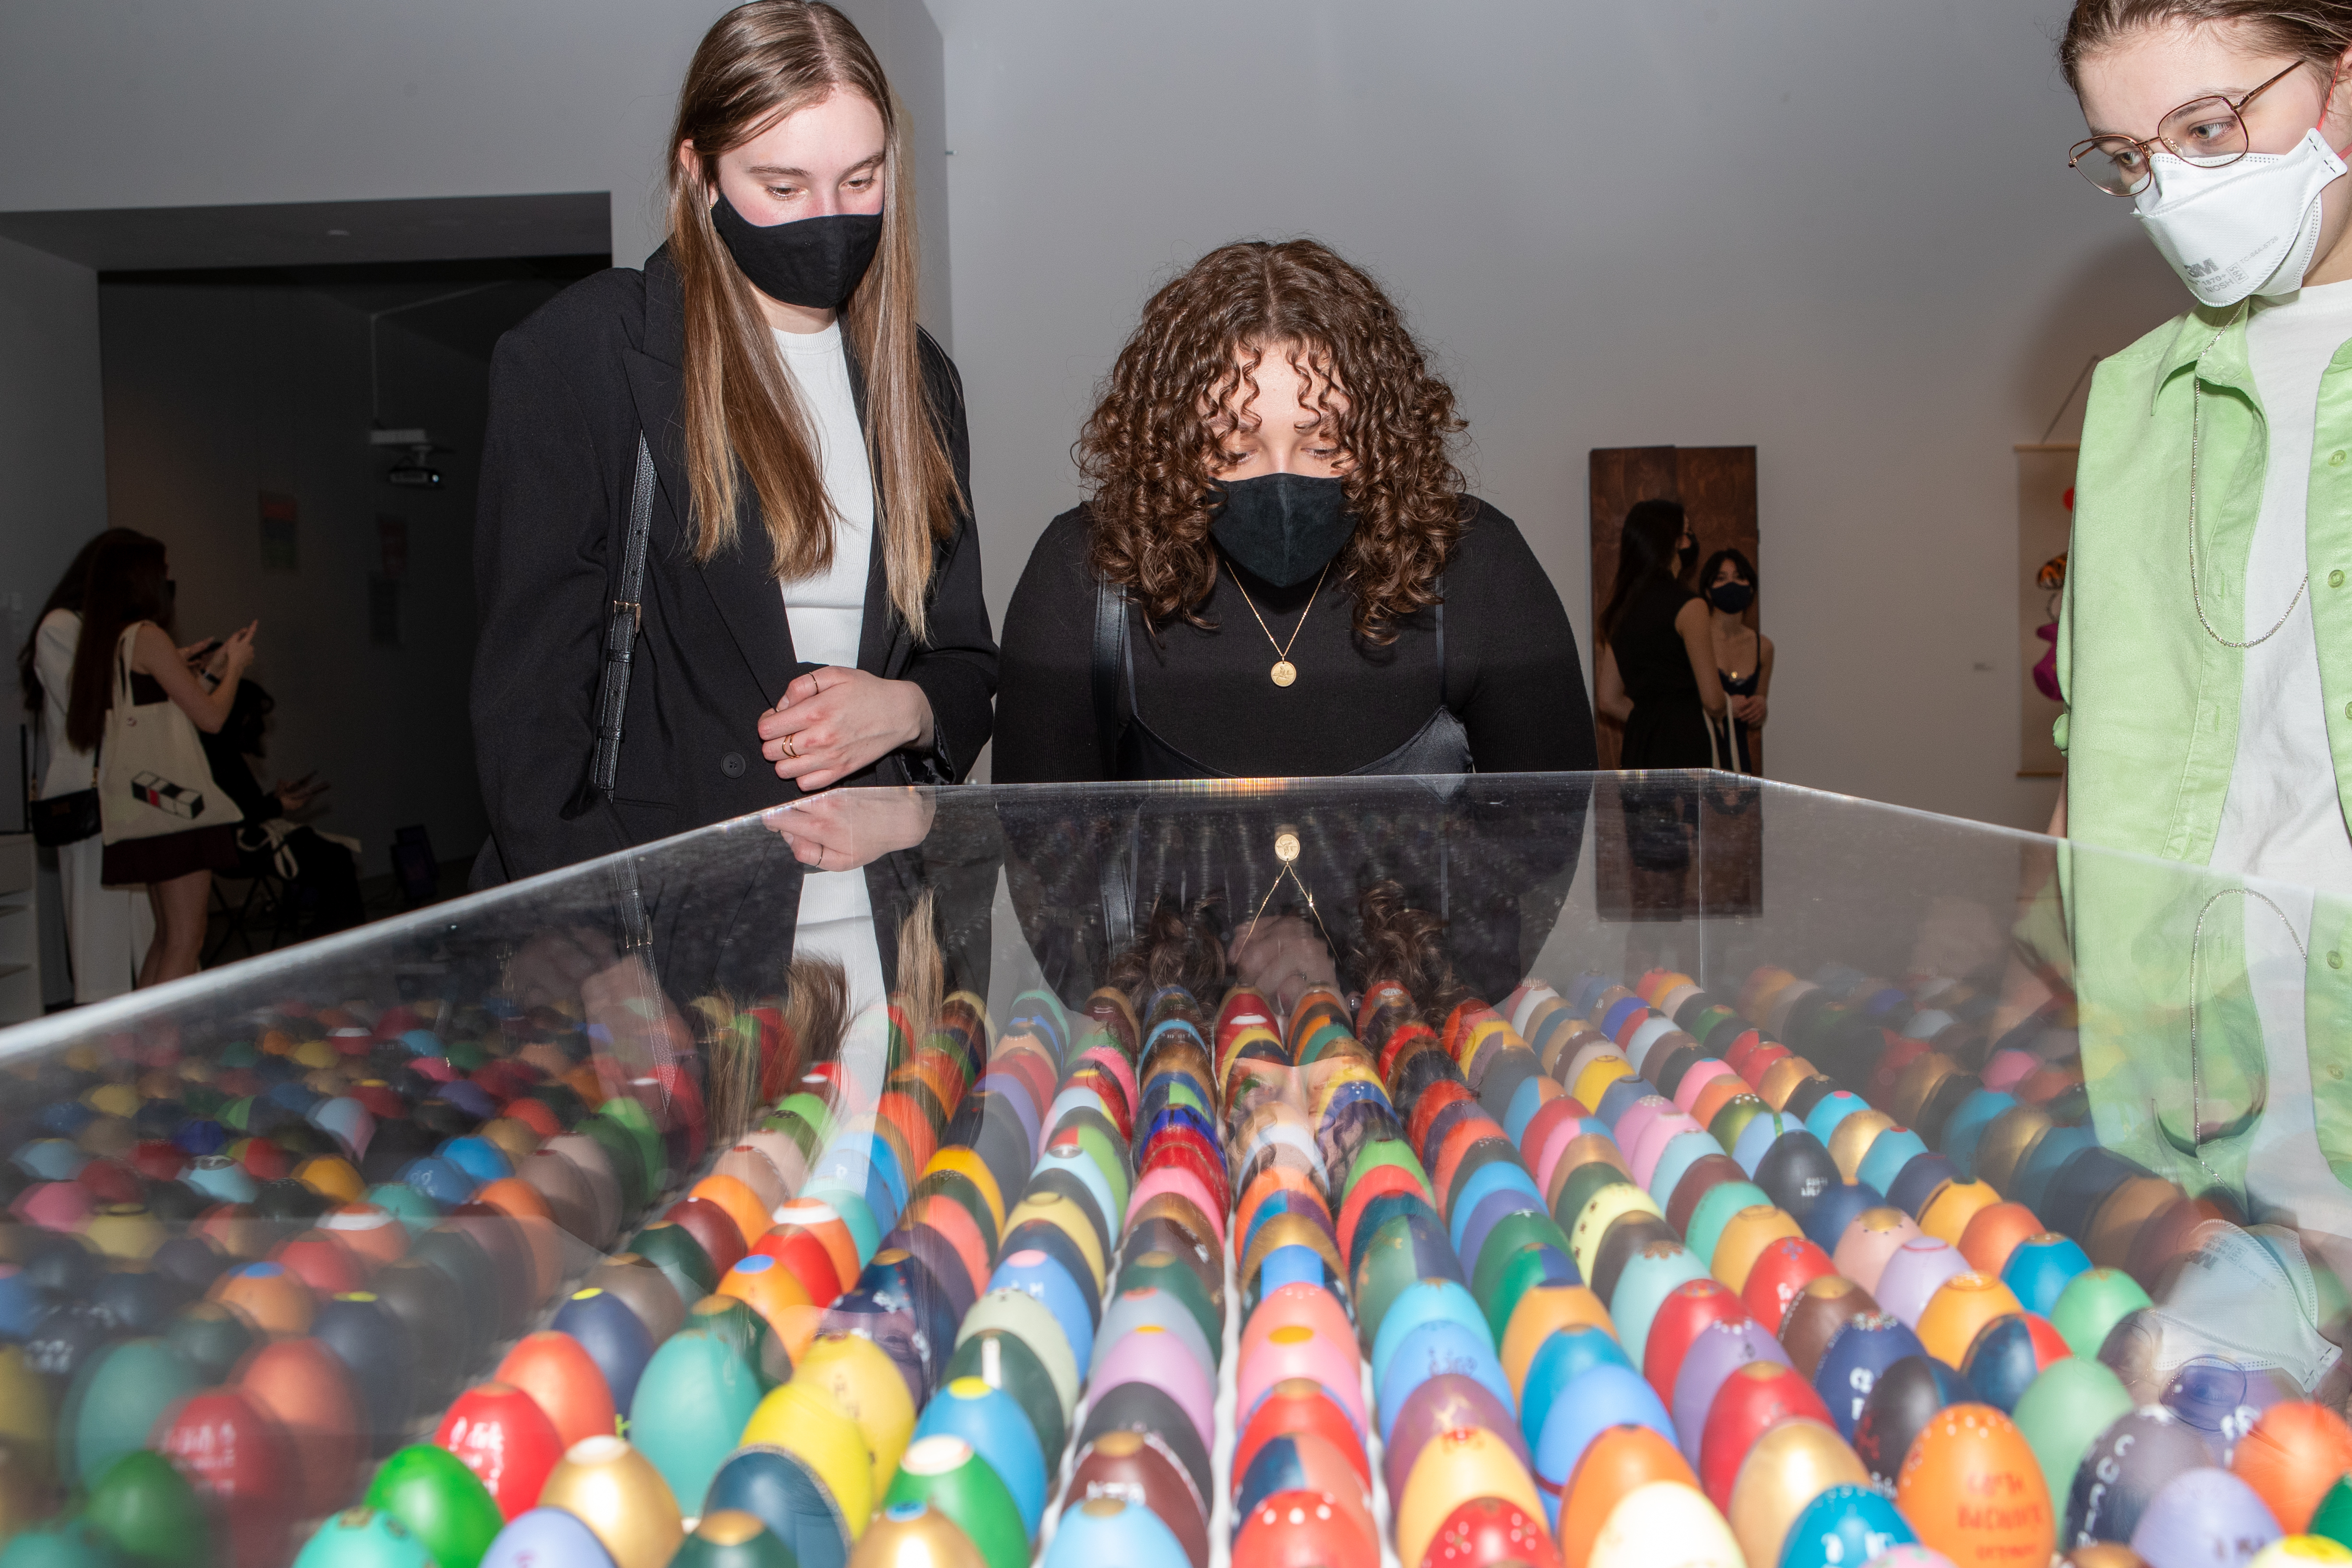 Students looking down at a table of colourful painted eggs